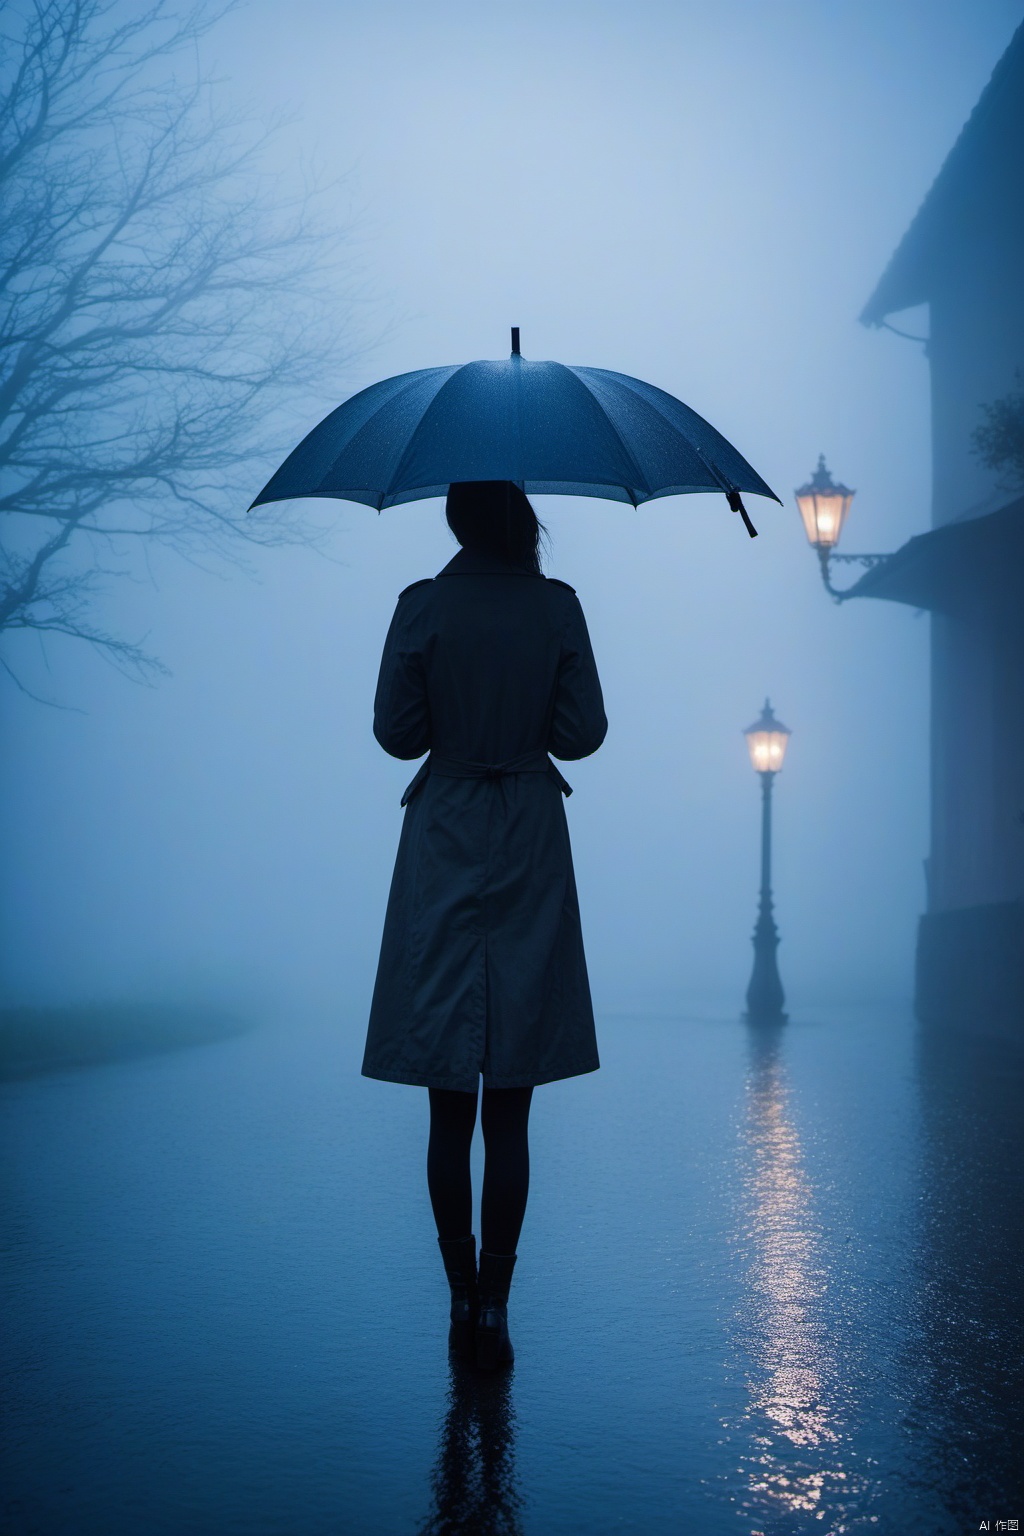 girl, cool, rain, cloudy, fog, medium, cool, dull, lonely

The dim light shines in the fog, and the figure stands in the fog holding an umbrella,